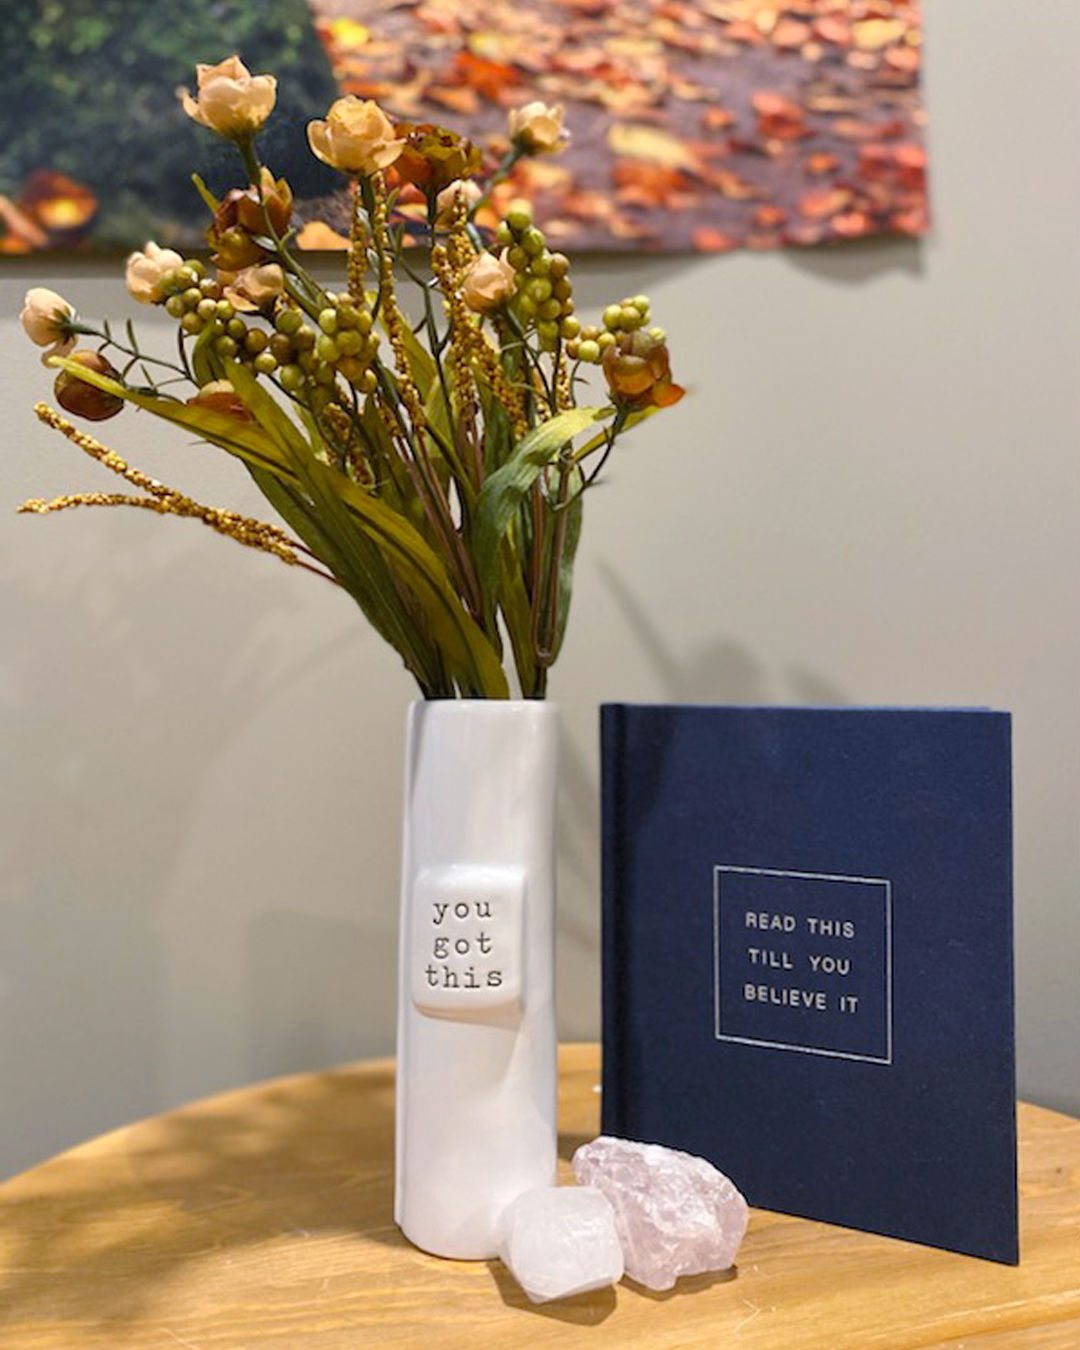 A table with a white vase with "you got this" printed on it with flowers, two crystals, and a navy blue book with "read this till you believe it" printed on the cover.